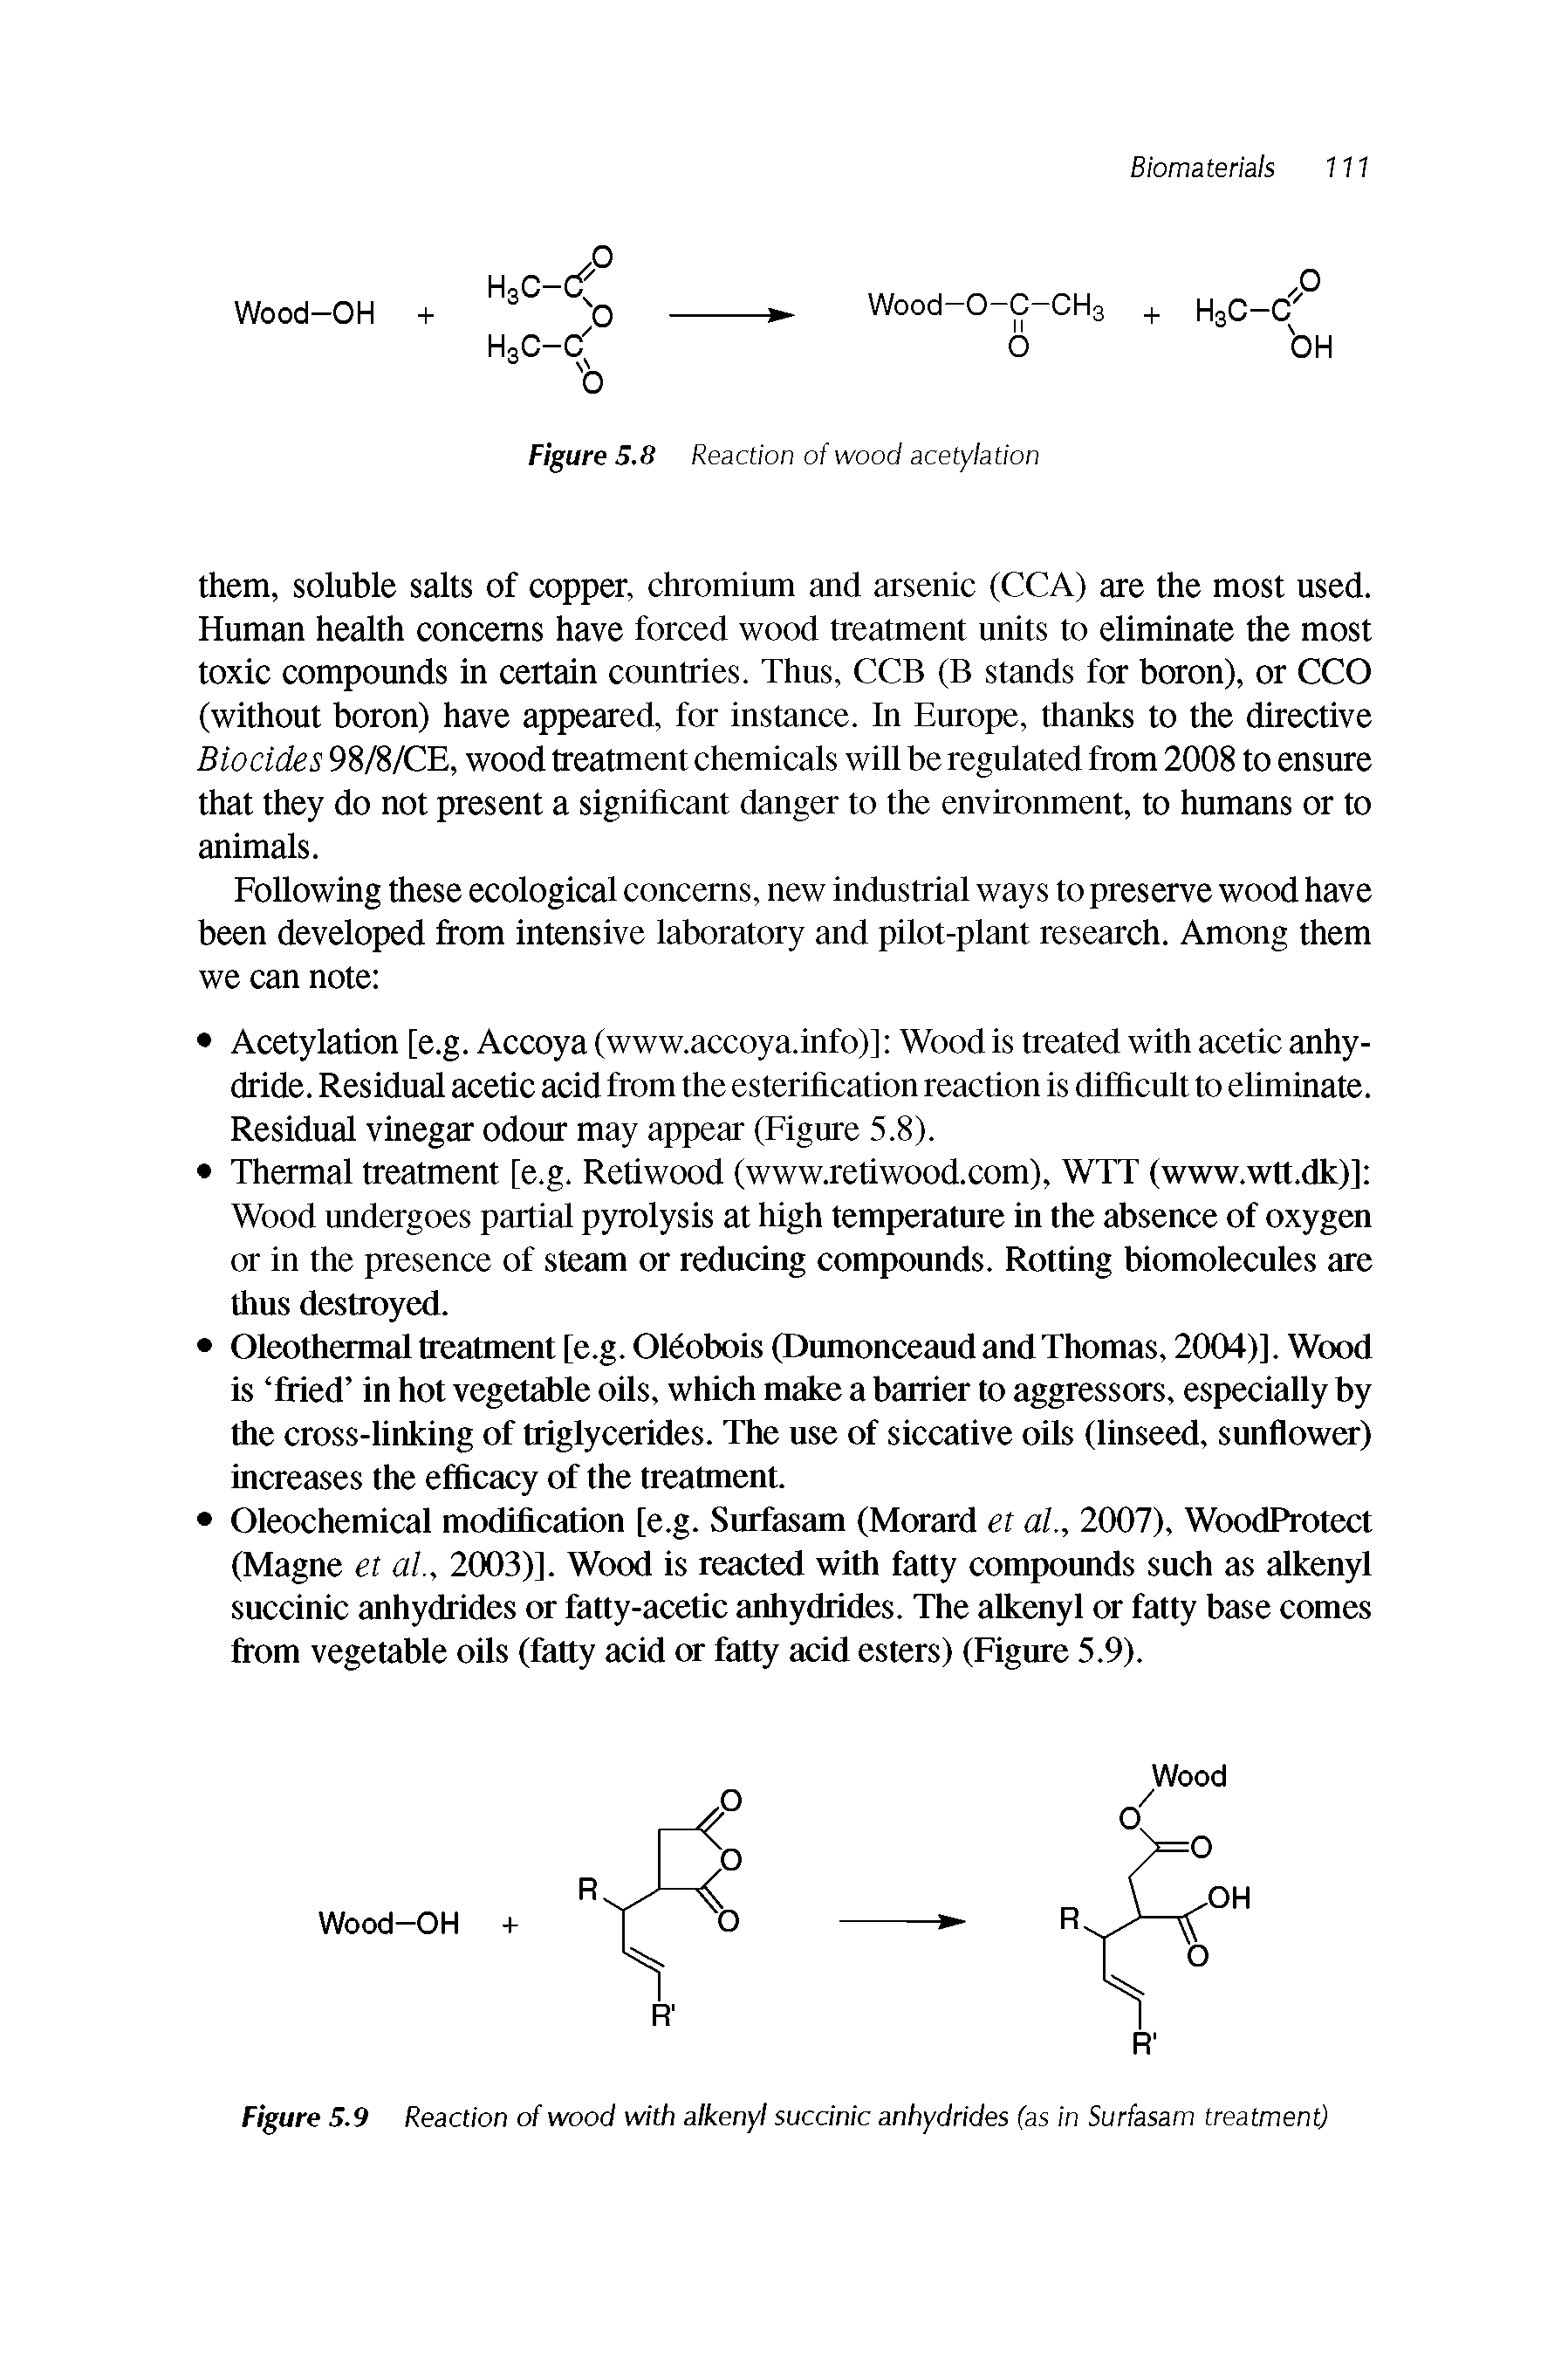 Figure 5.9 Reaction of wood with alkenyl succinic anhydrides (as in Surfasam treatment)...